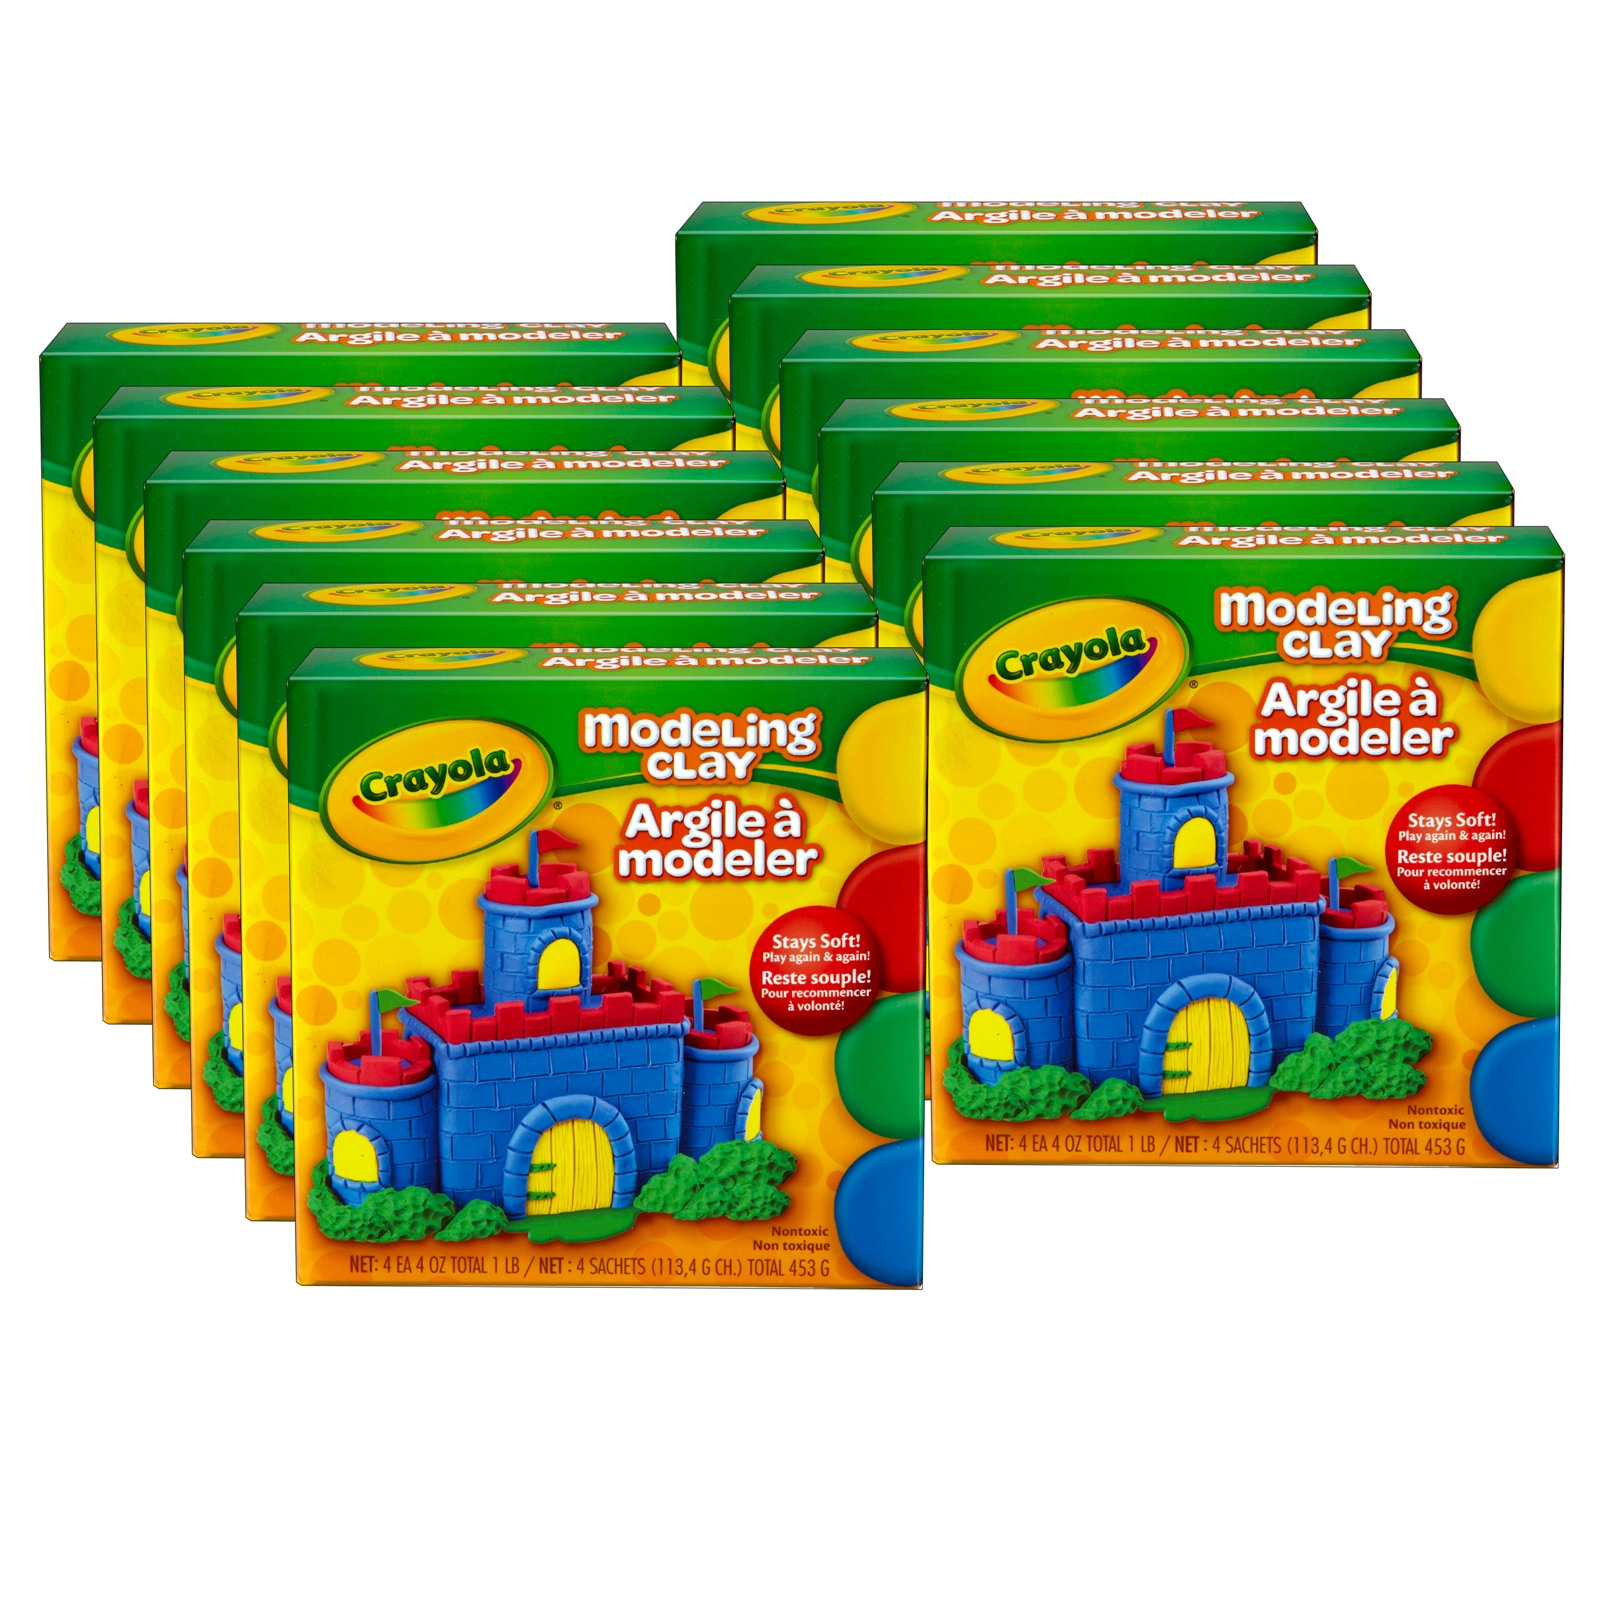 KLEAN KLAY Set of 3 Modeling Clay Non-Drying 6 oz Box 170g Red,Blue Yellow